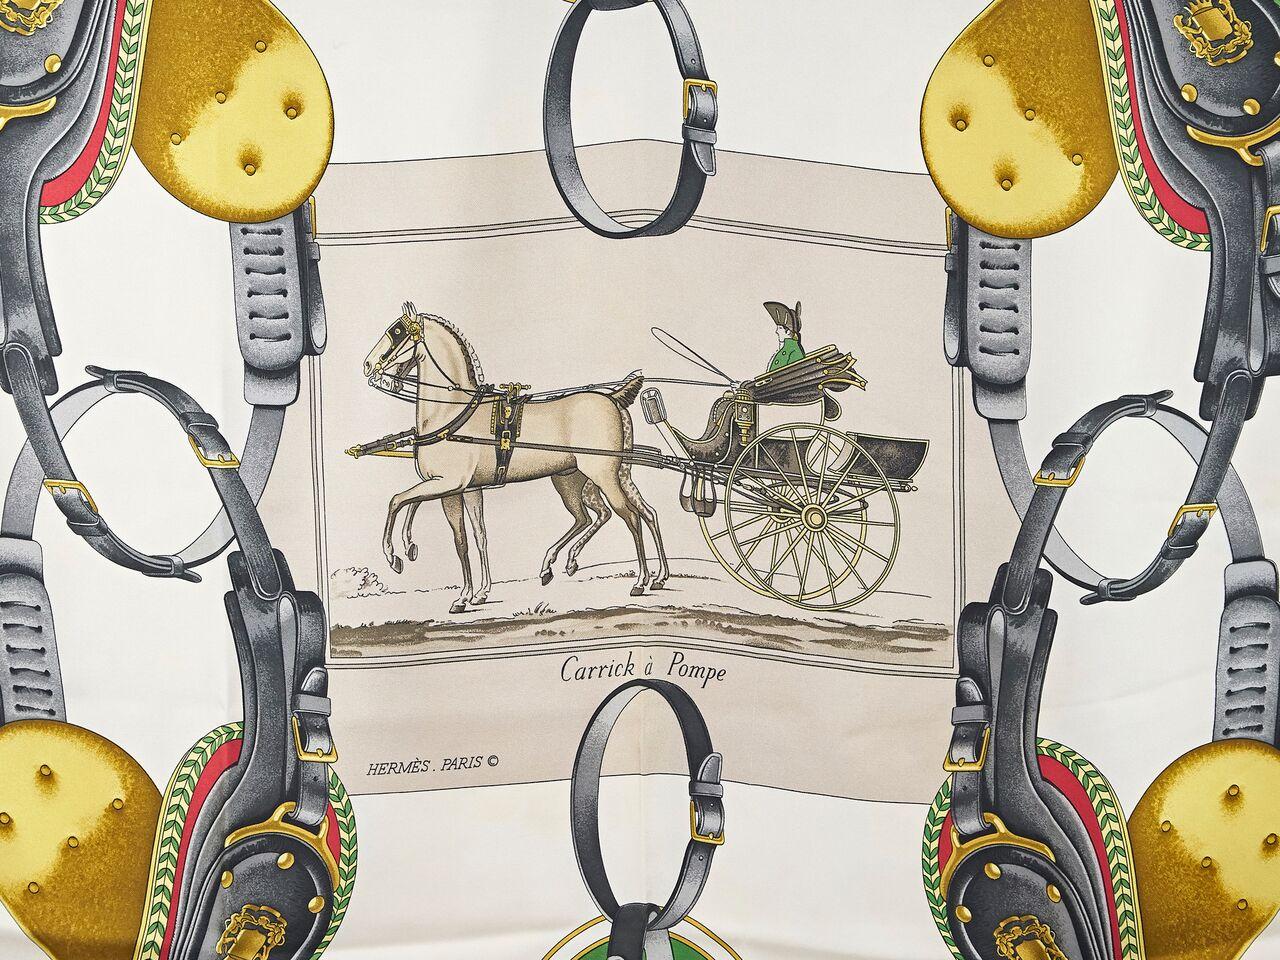 Product details:  Multicolor equestrian-printed silk scarf by Hermes.  33